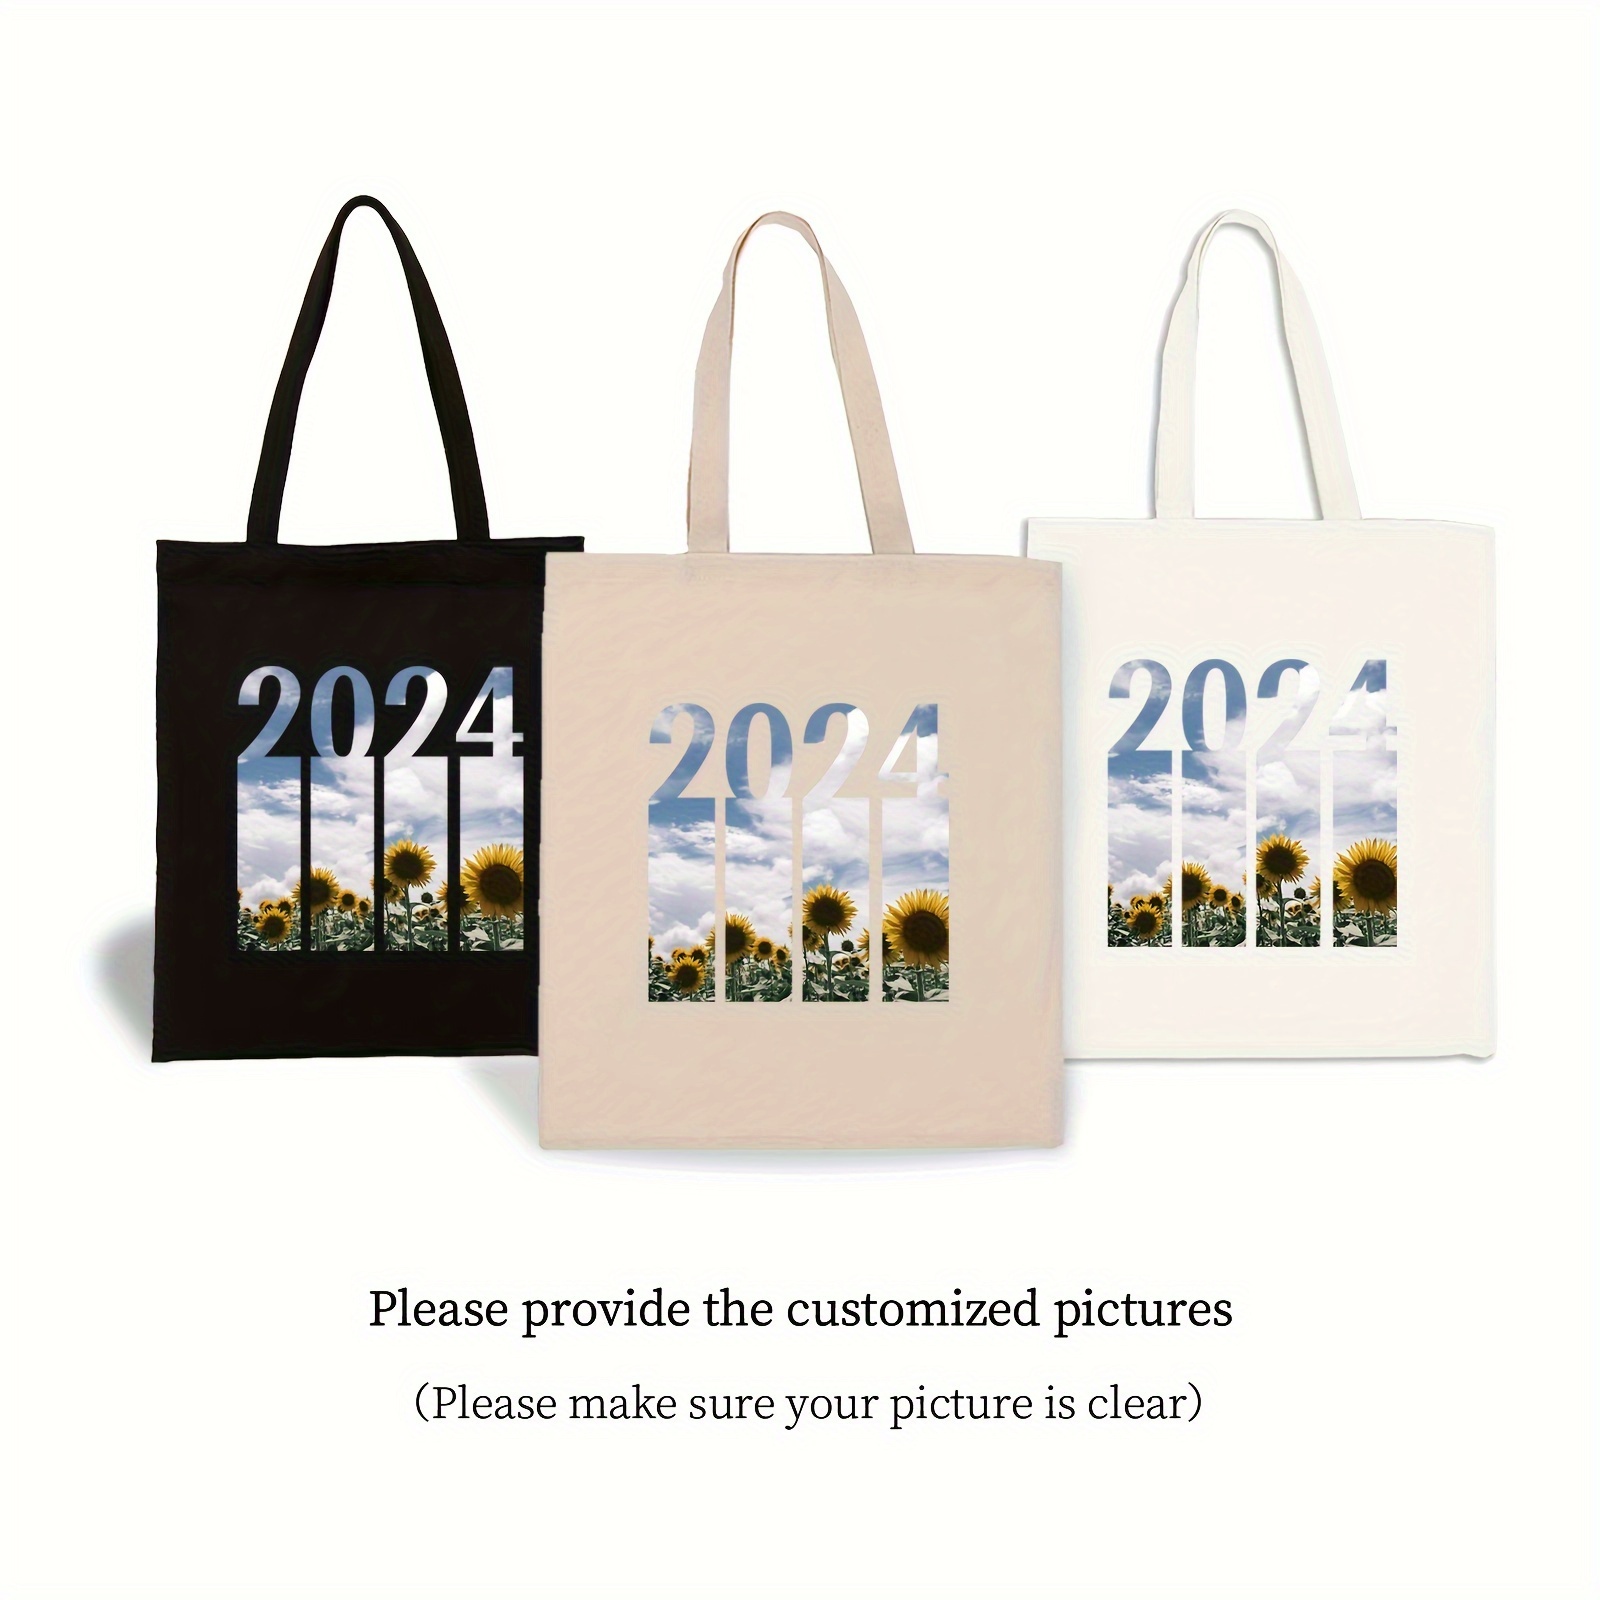 

2pcs, Custom Tote Bag, Personalized Canvas Bag, With Customizable Pictures And Text, Print On Both Sides, For Daily Commute, Outdoor Picnic, Party, Travelling, Shopping